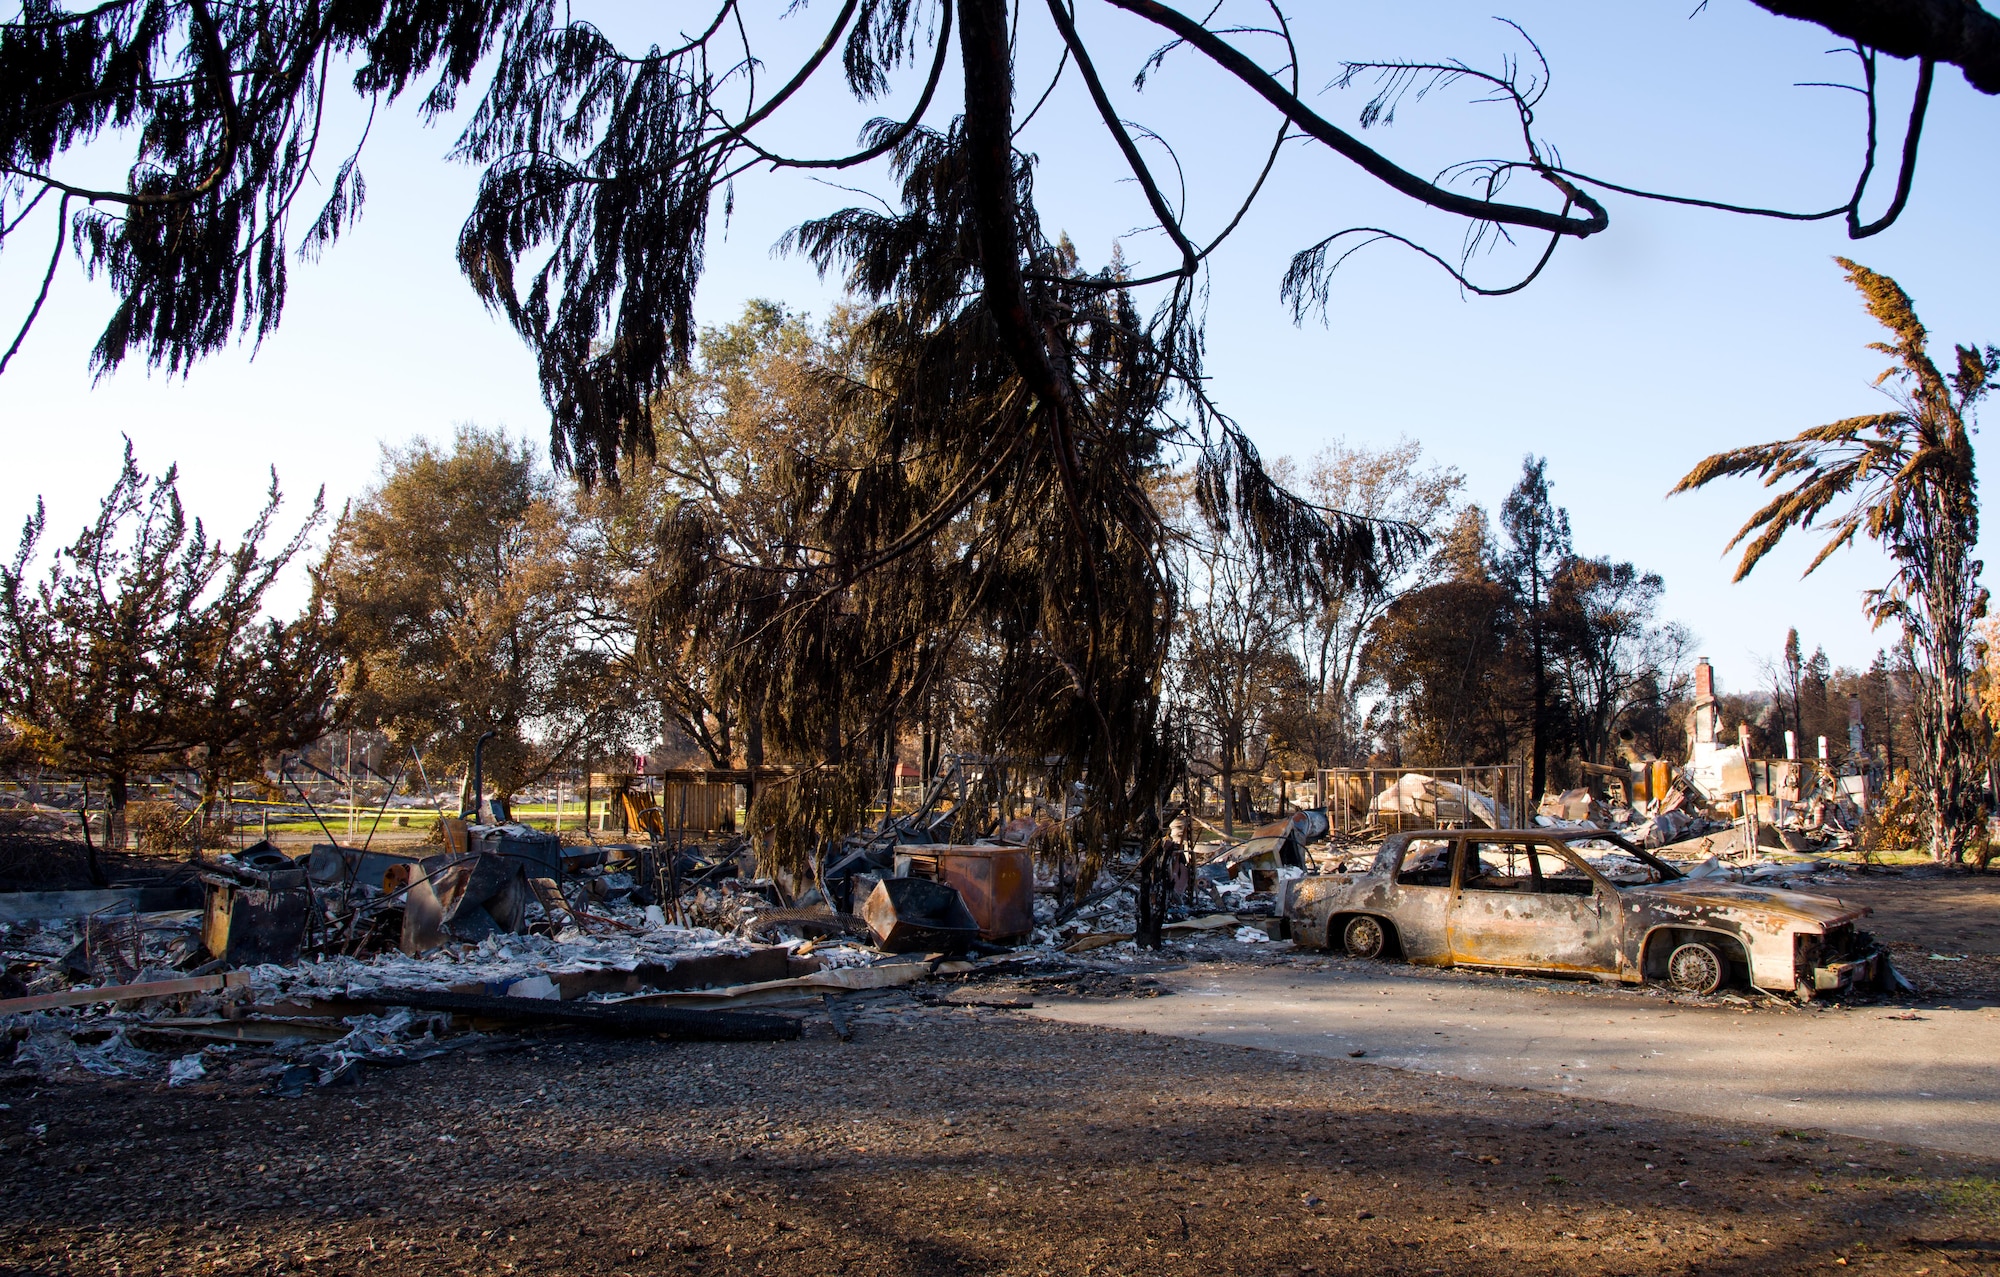 The neighborhood of Senior Airman Martin Baglien, 349th Civil Engineer Squadron firefighter, family’s home lies in ruin after the California wildfire in Santa Rosa, Calif., on Oct. 31, 2017. The recent wildfires consumed more than 15,000 homes, and caused at least $3 billion in damage. The city of Santa Rosa alone lost 5 percent of it’s housing.